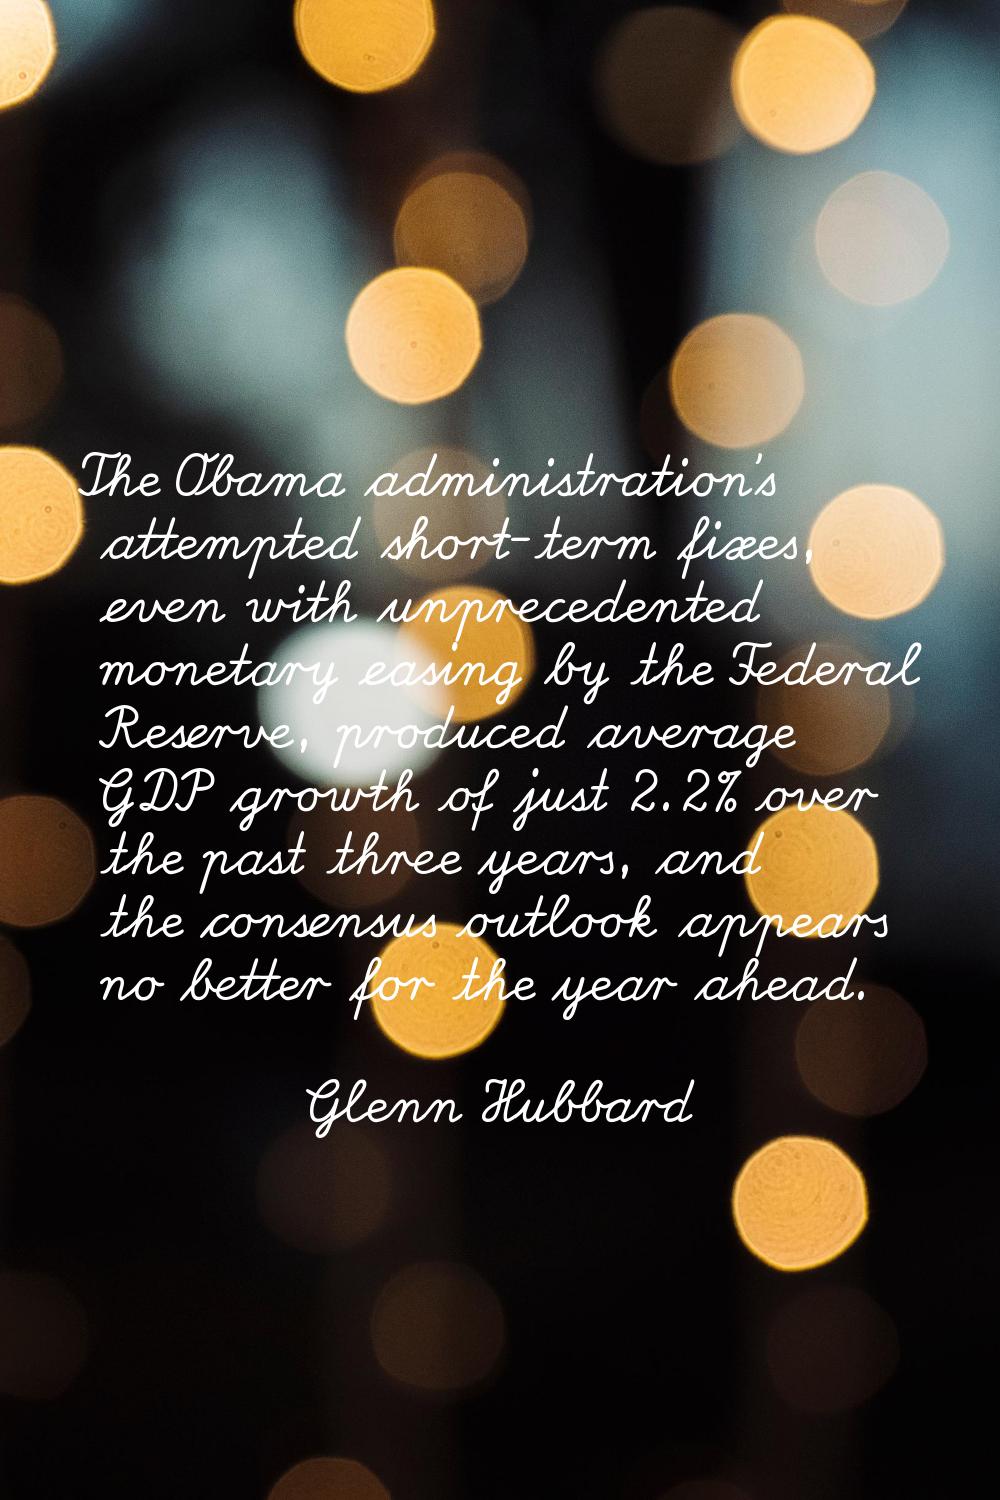 The Obama administration's attempted short-term fixes, even with unprecedented monetary easing by t